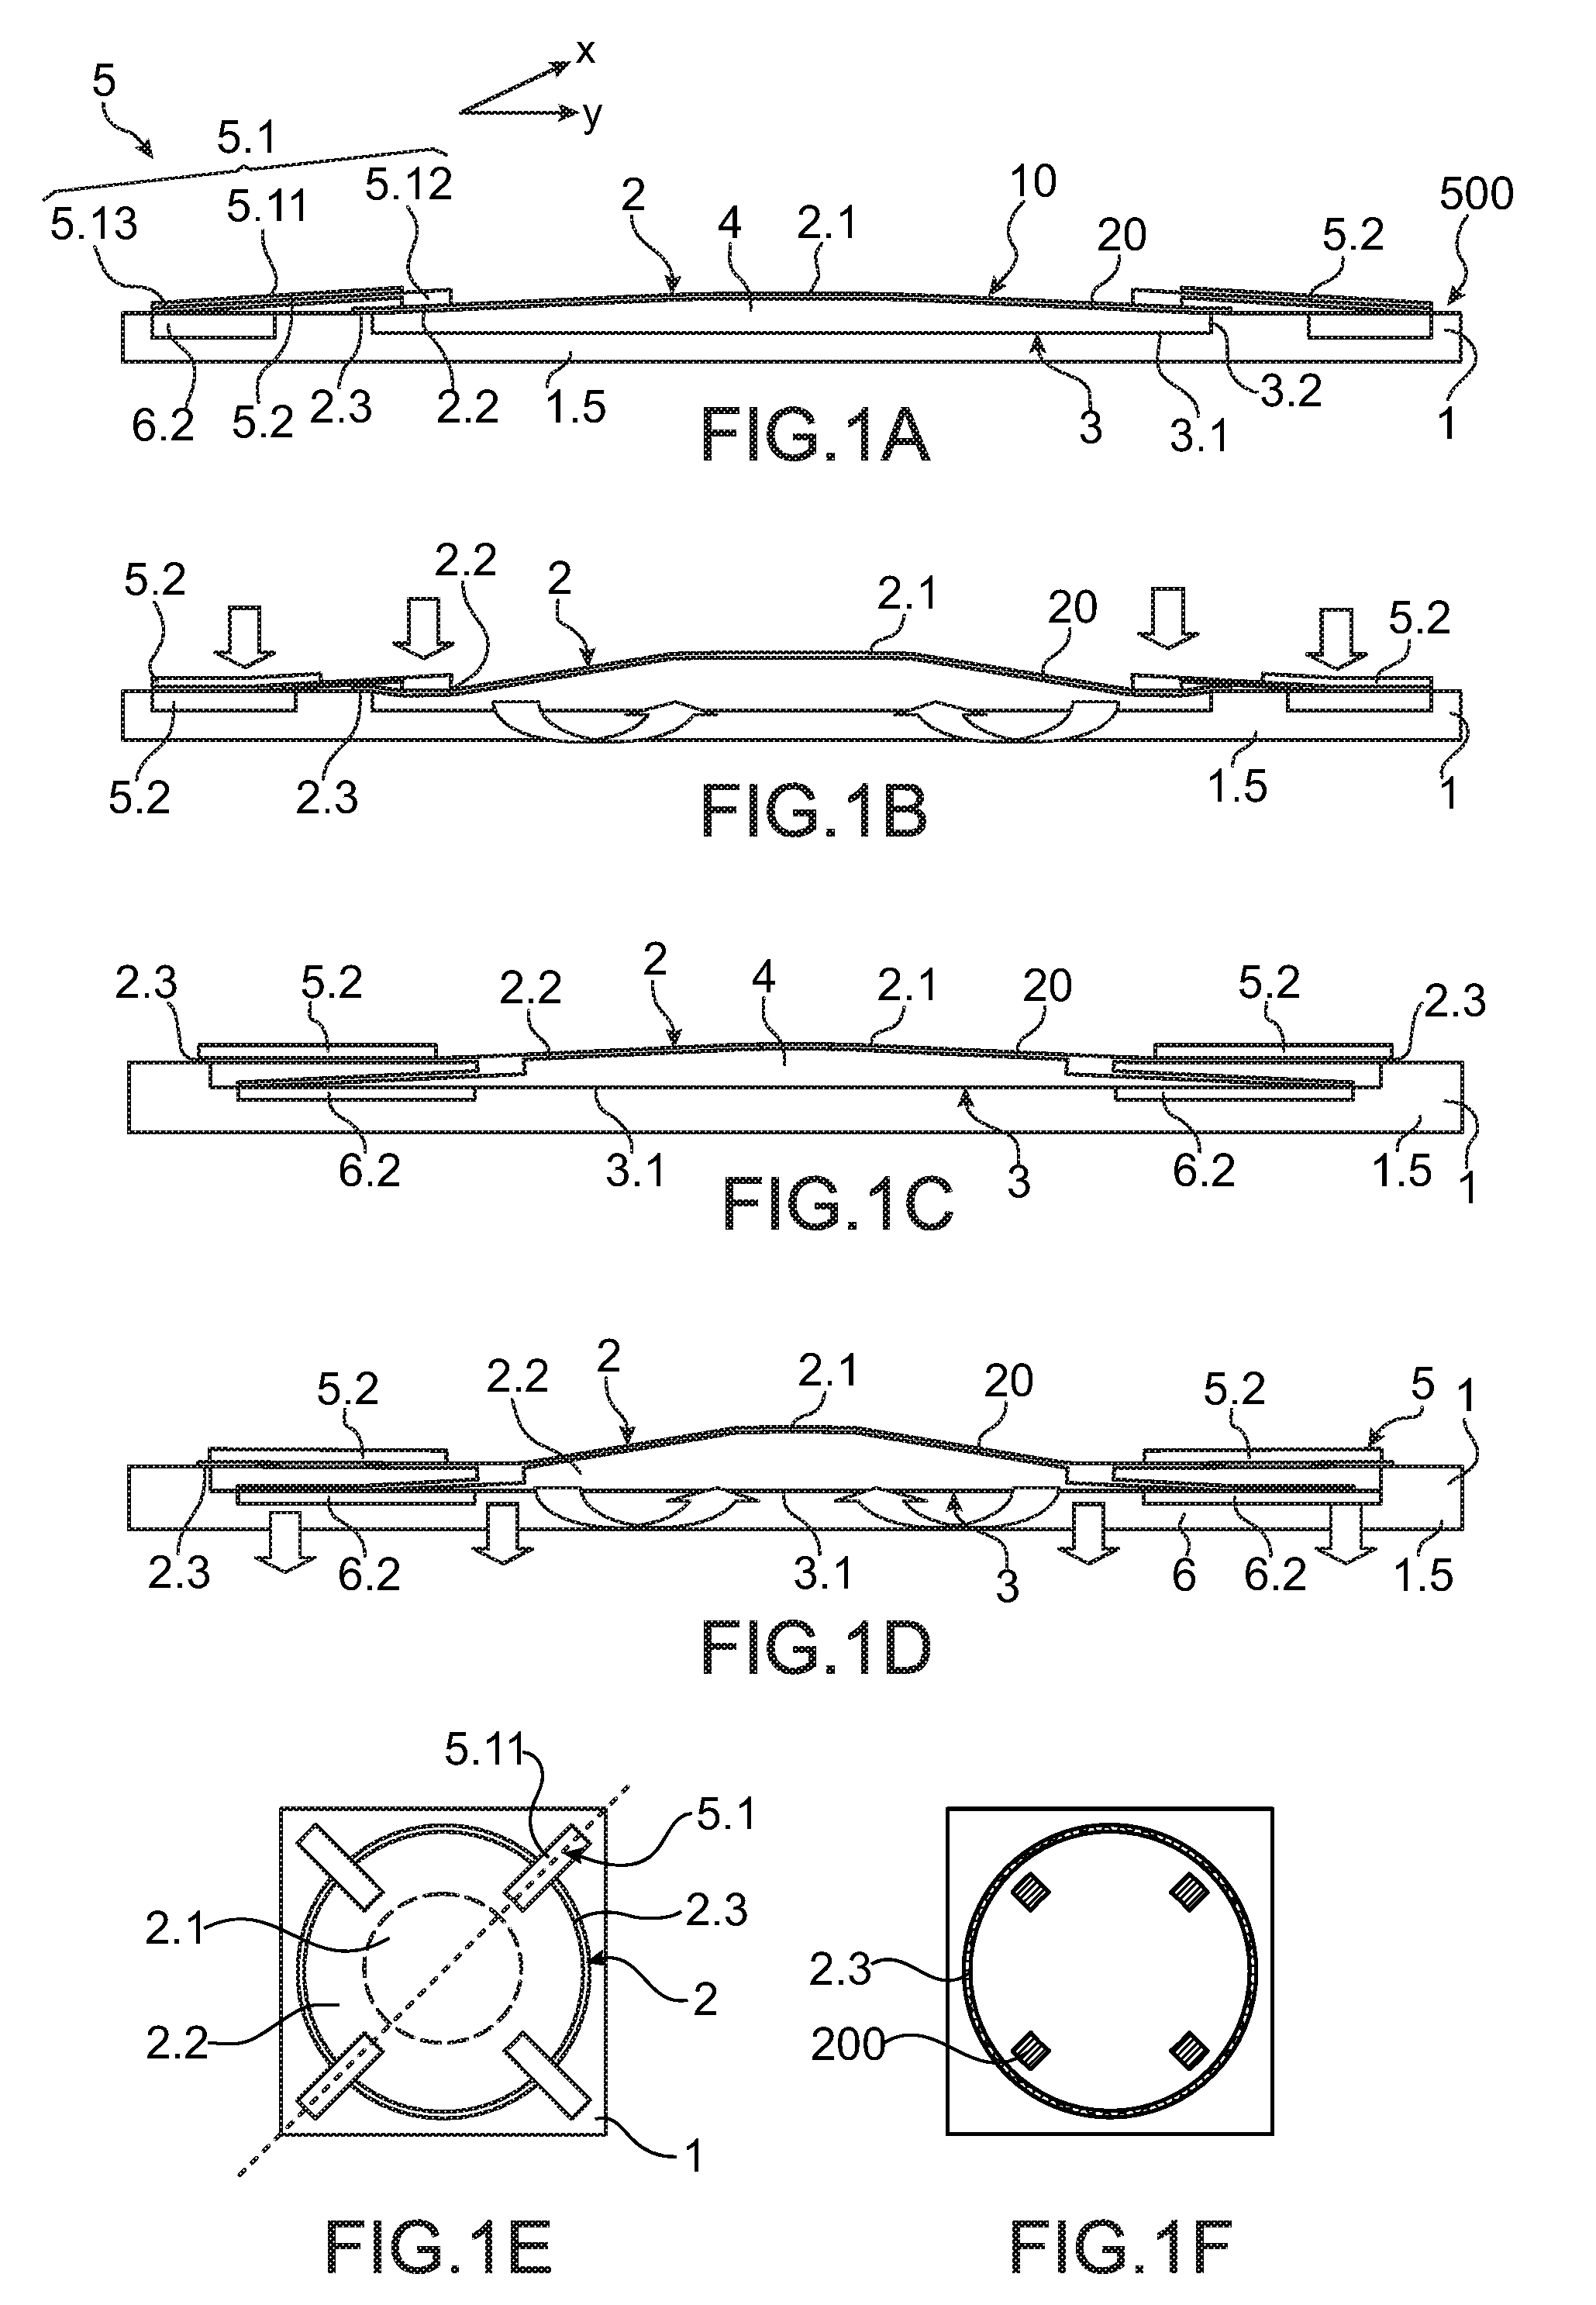 Membrane, especially for an optical device having a deformable membrane